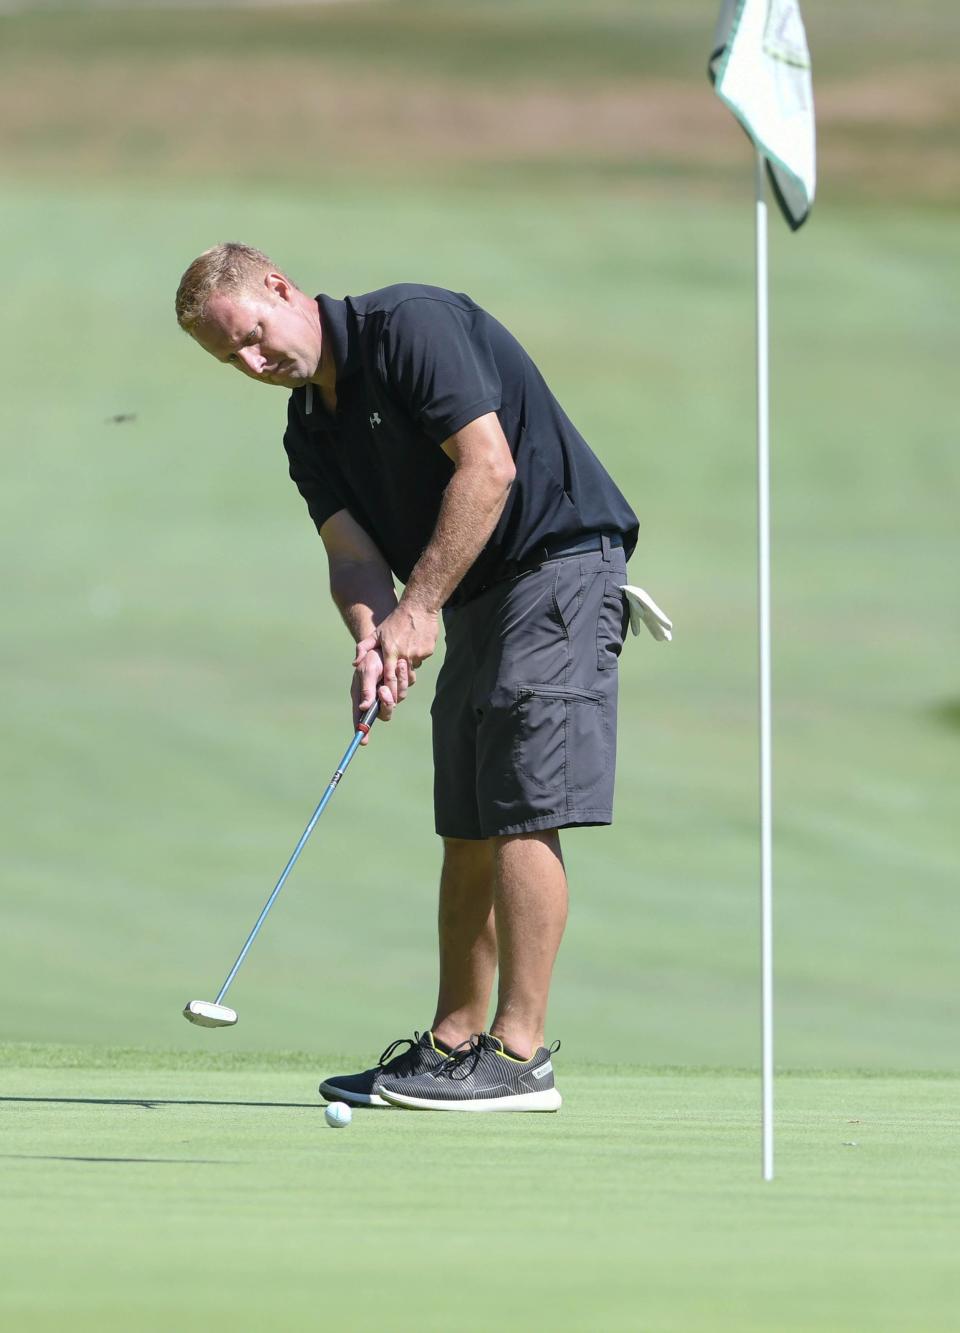 Dave Oates putts during a recent Stark County Amateur Golf Tournament.